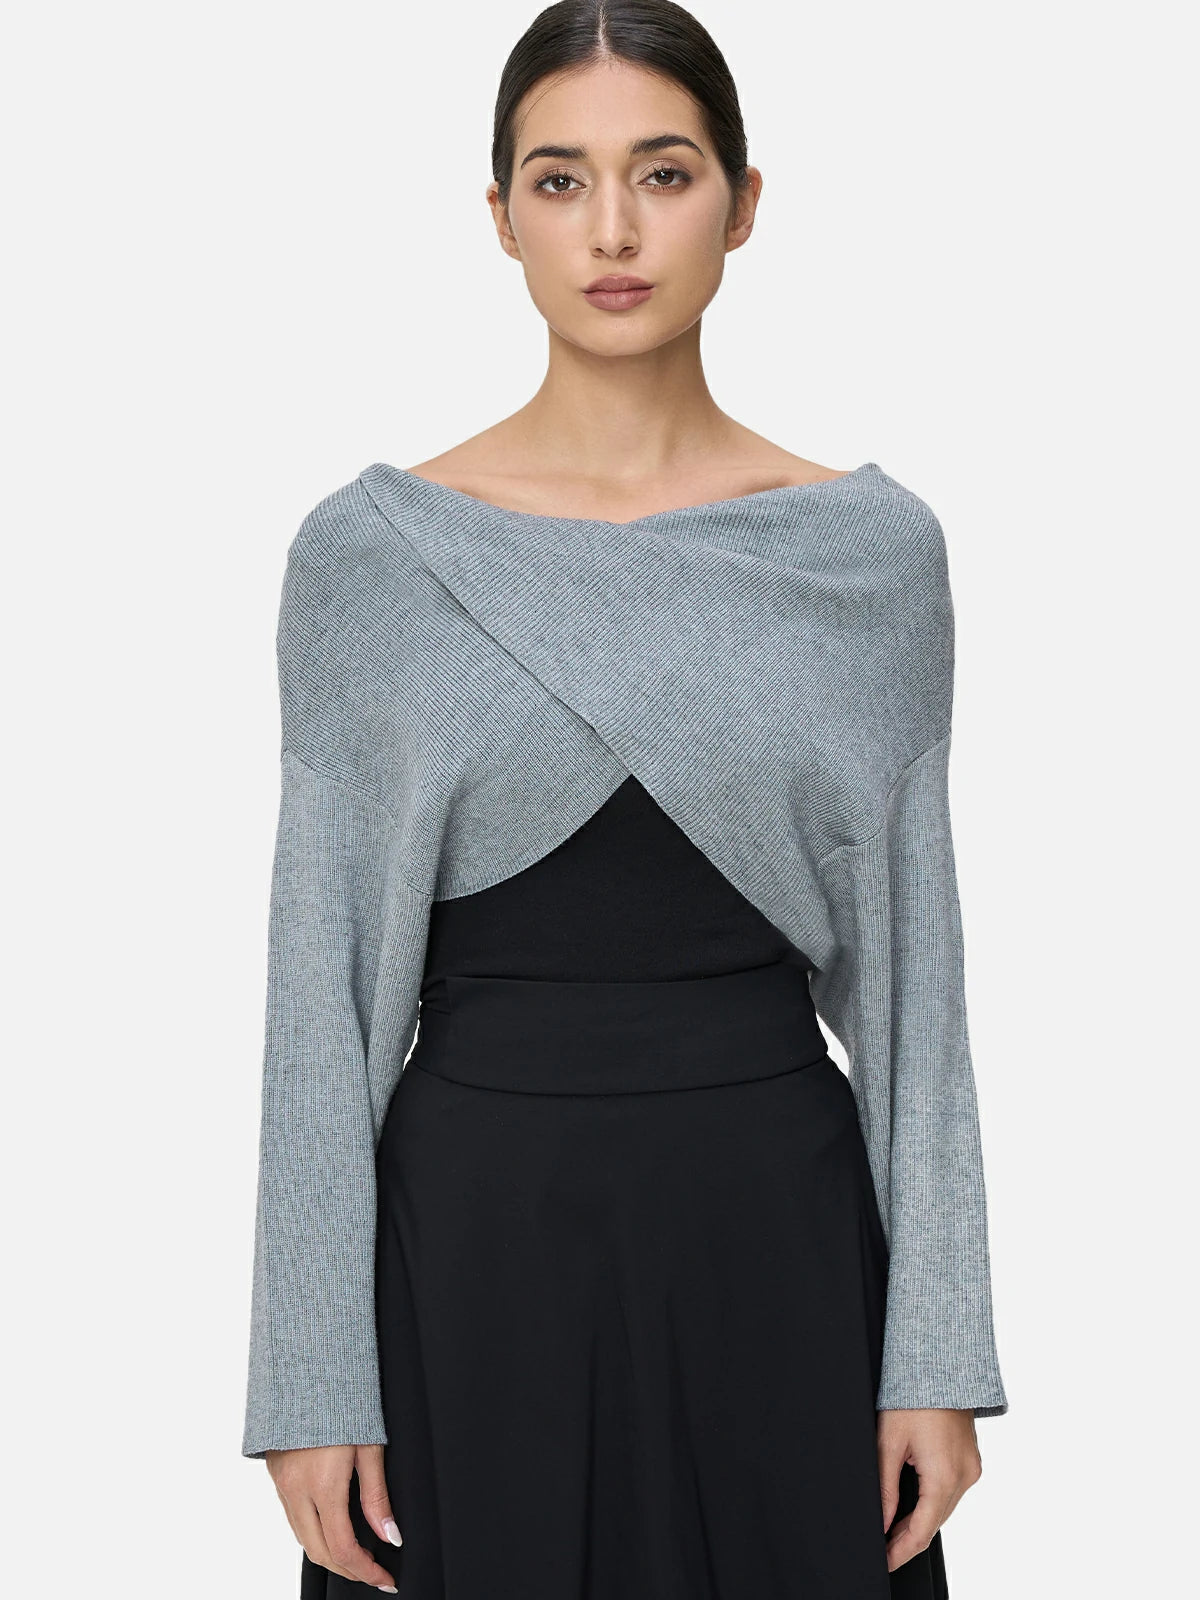 Avant-garde Knit Sweater: Elevate your style with this avant-garde knit sweater.